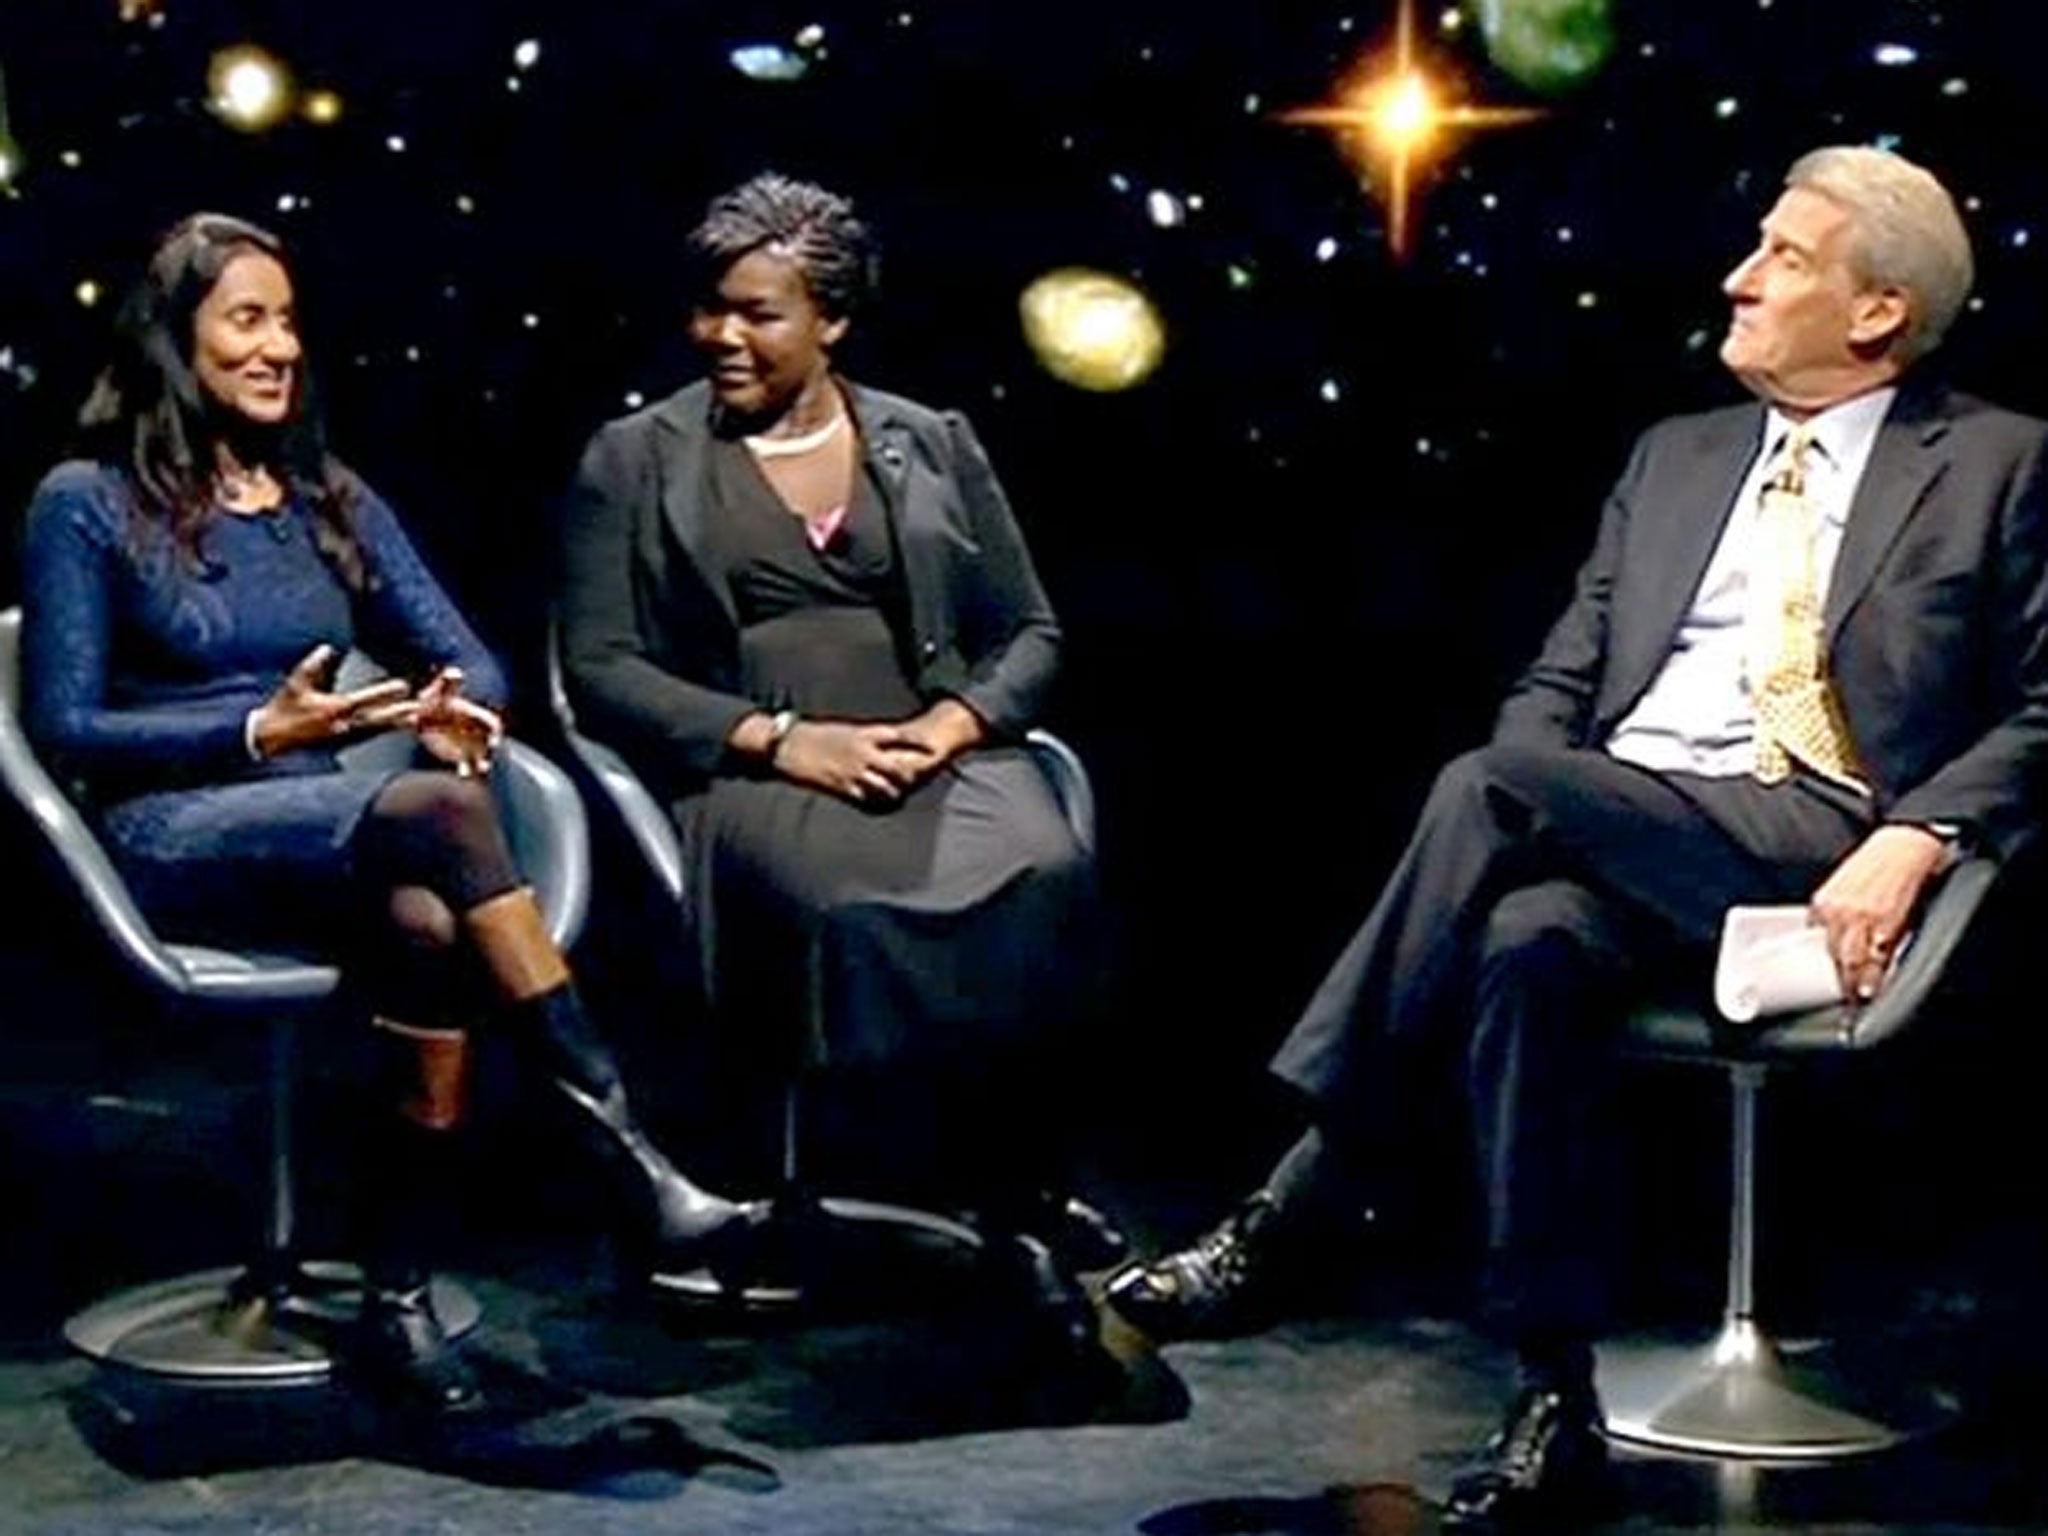 Dr Hiranya Peiris and Dr Maggie Aderin-Pocock appearing on Newsnight with Jeremy Paxman